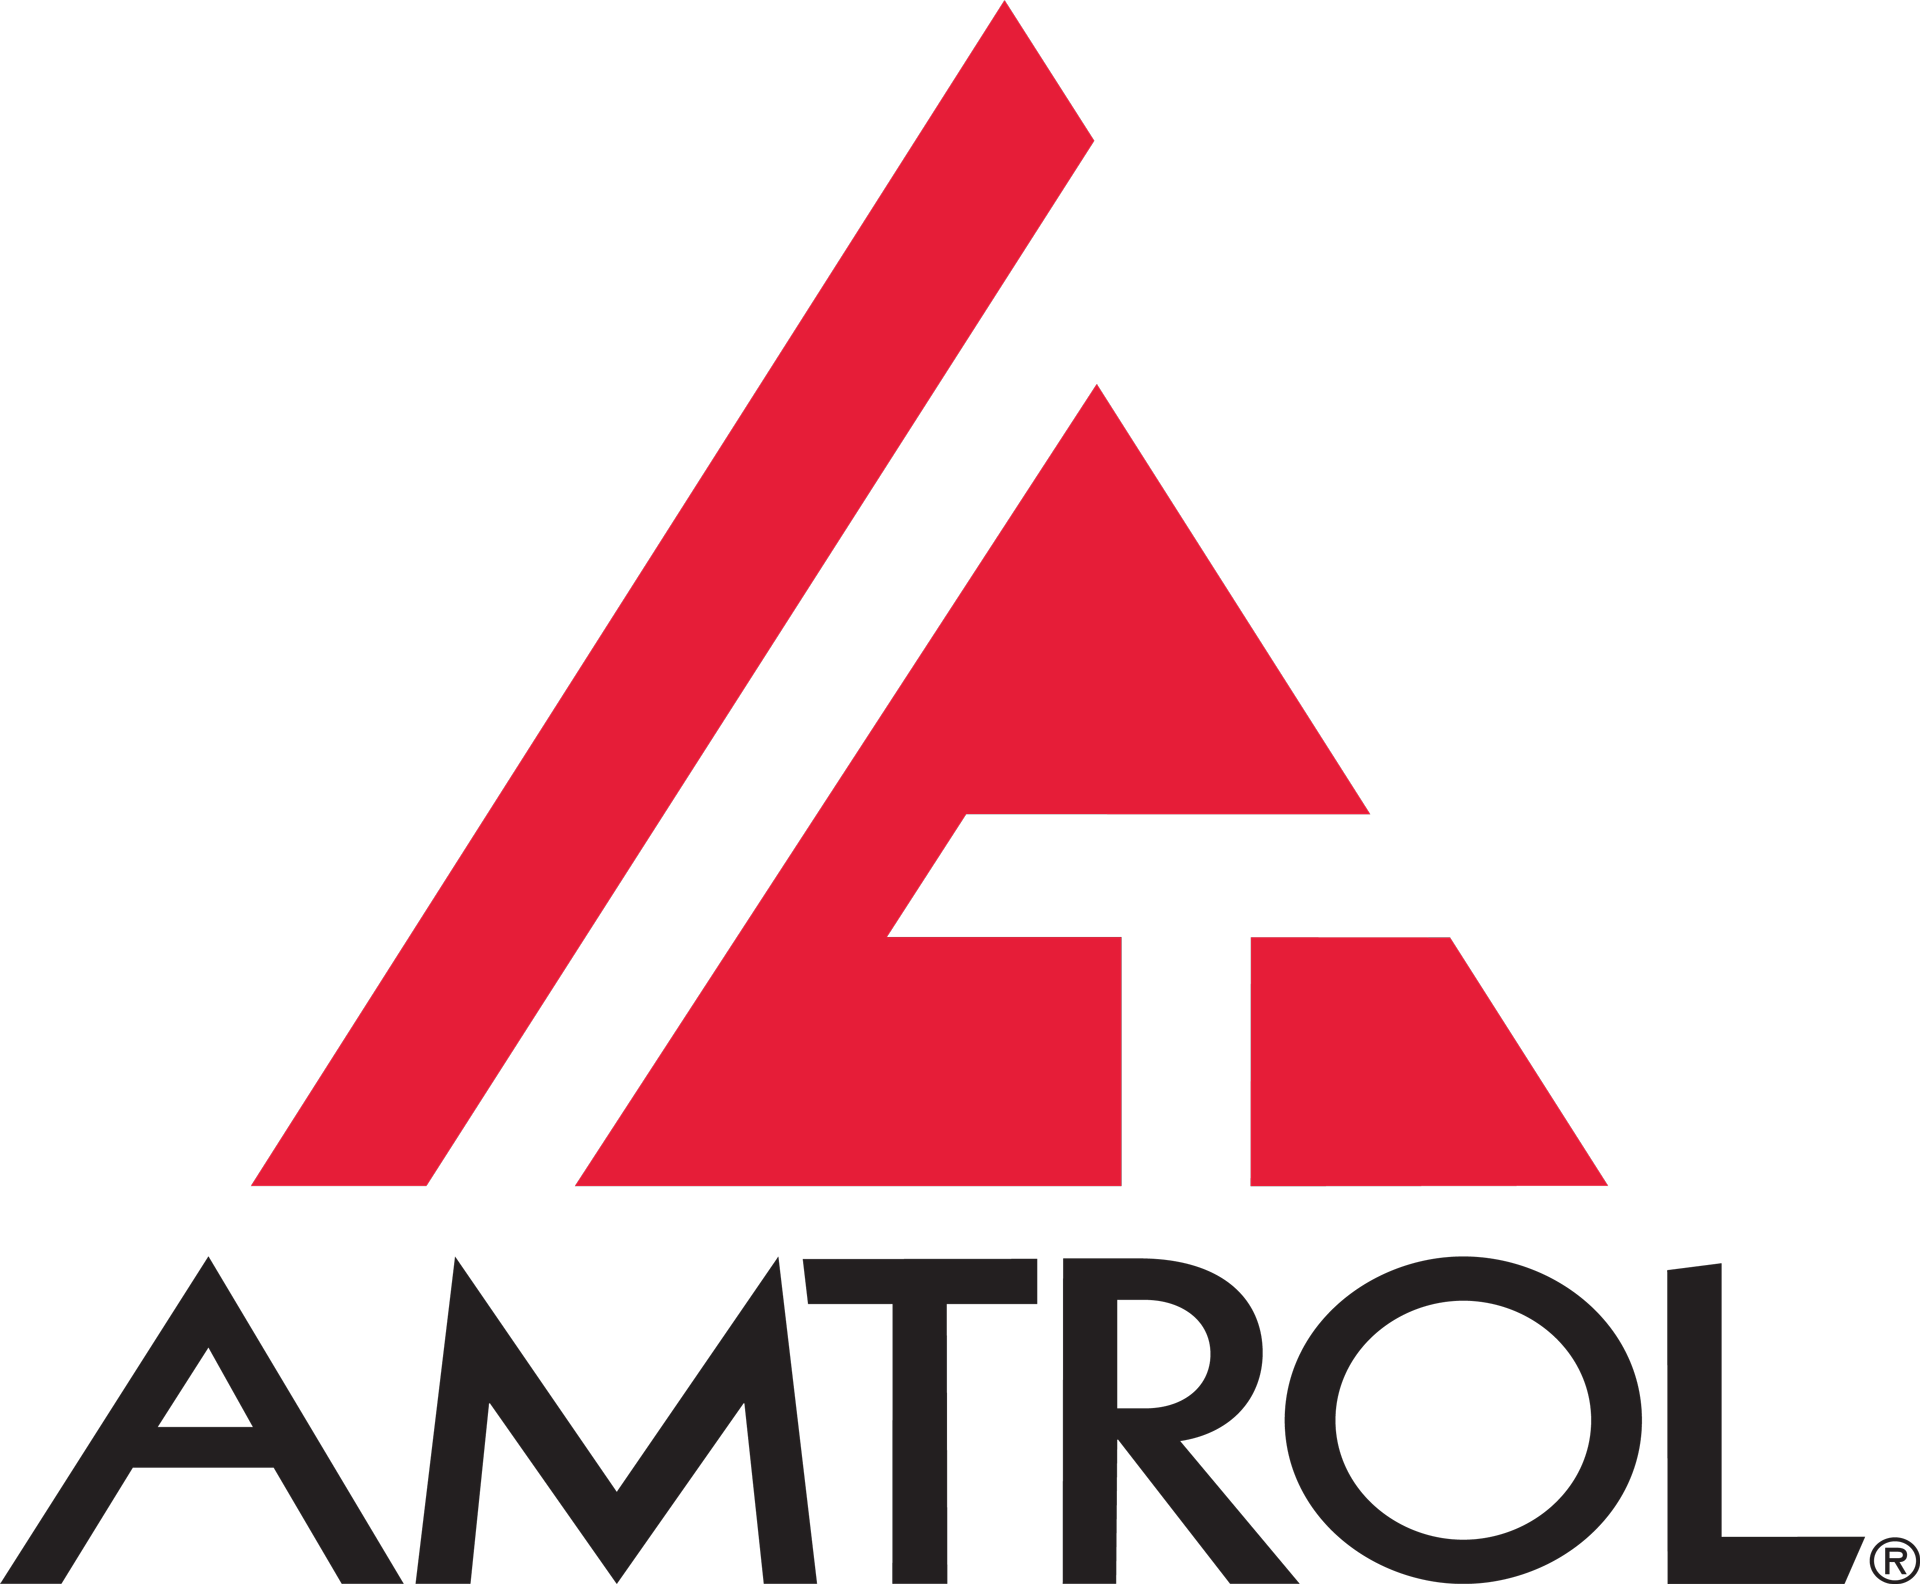 Amtrol logo in red and black